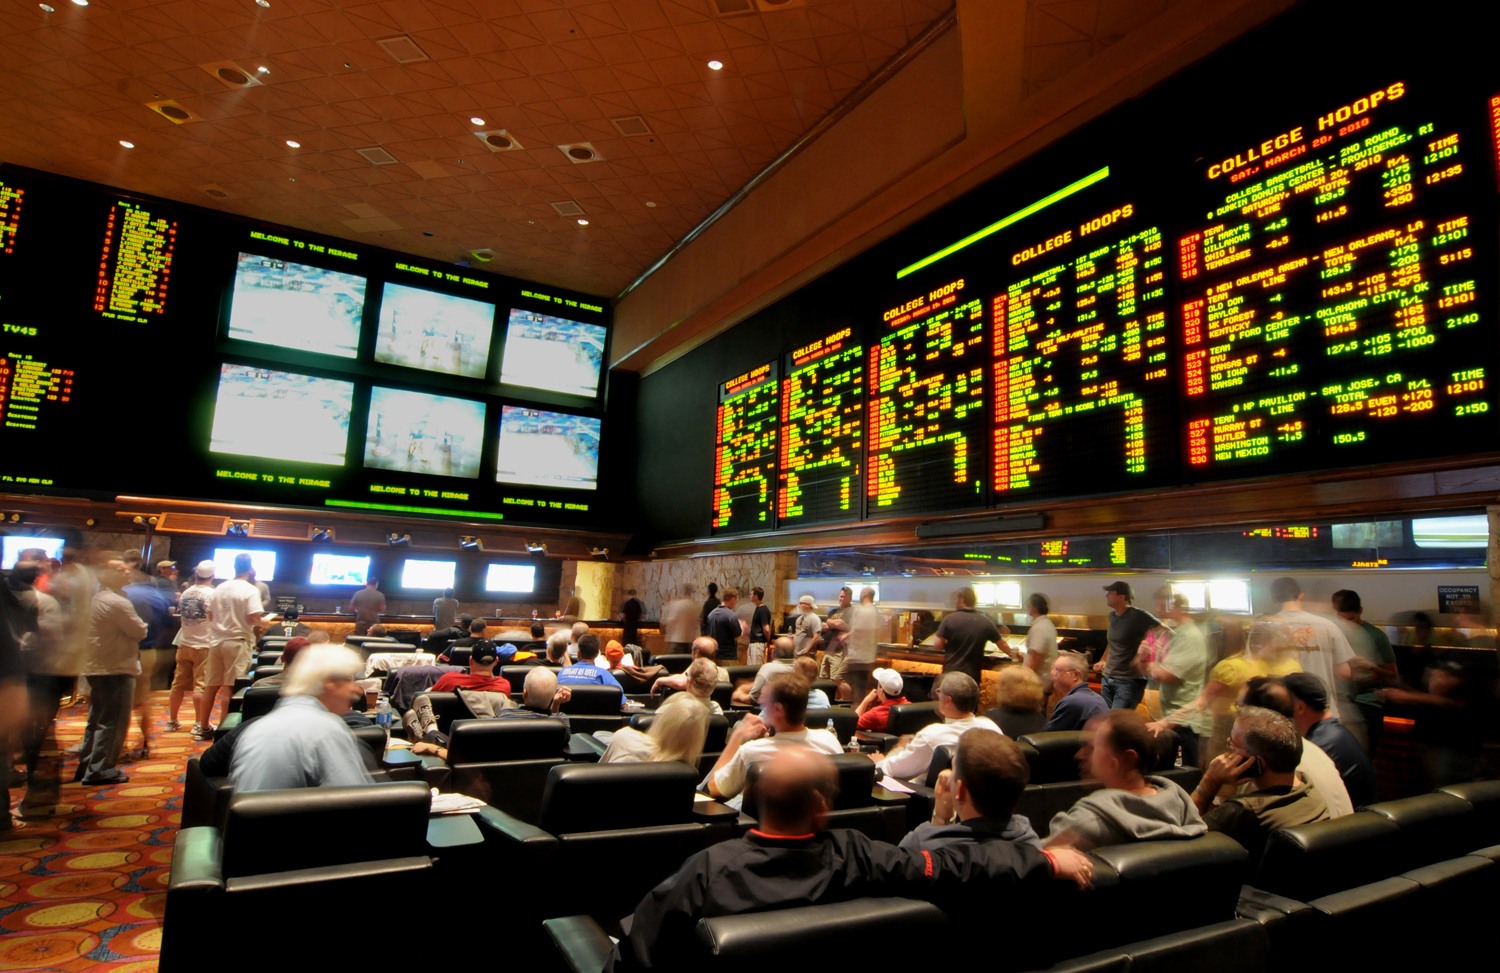 sports betting systems explained photos